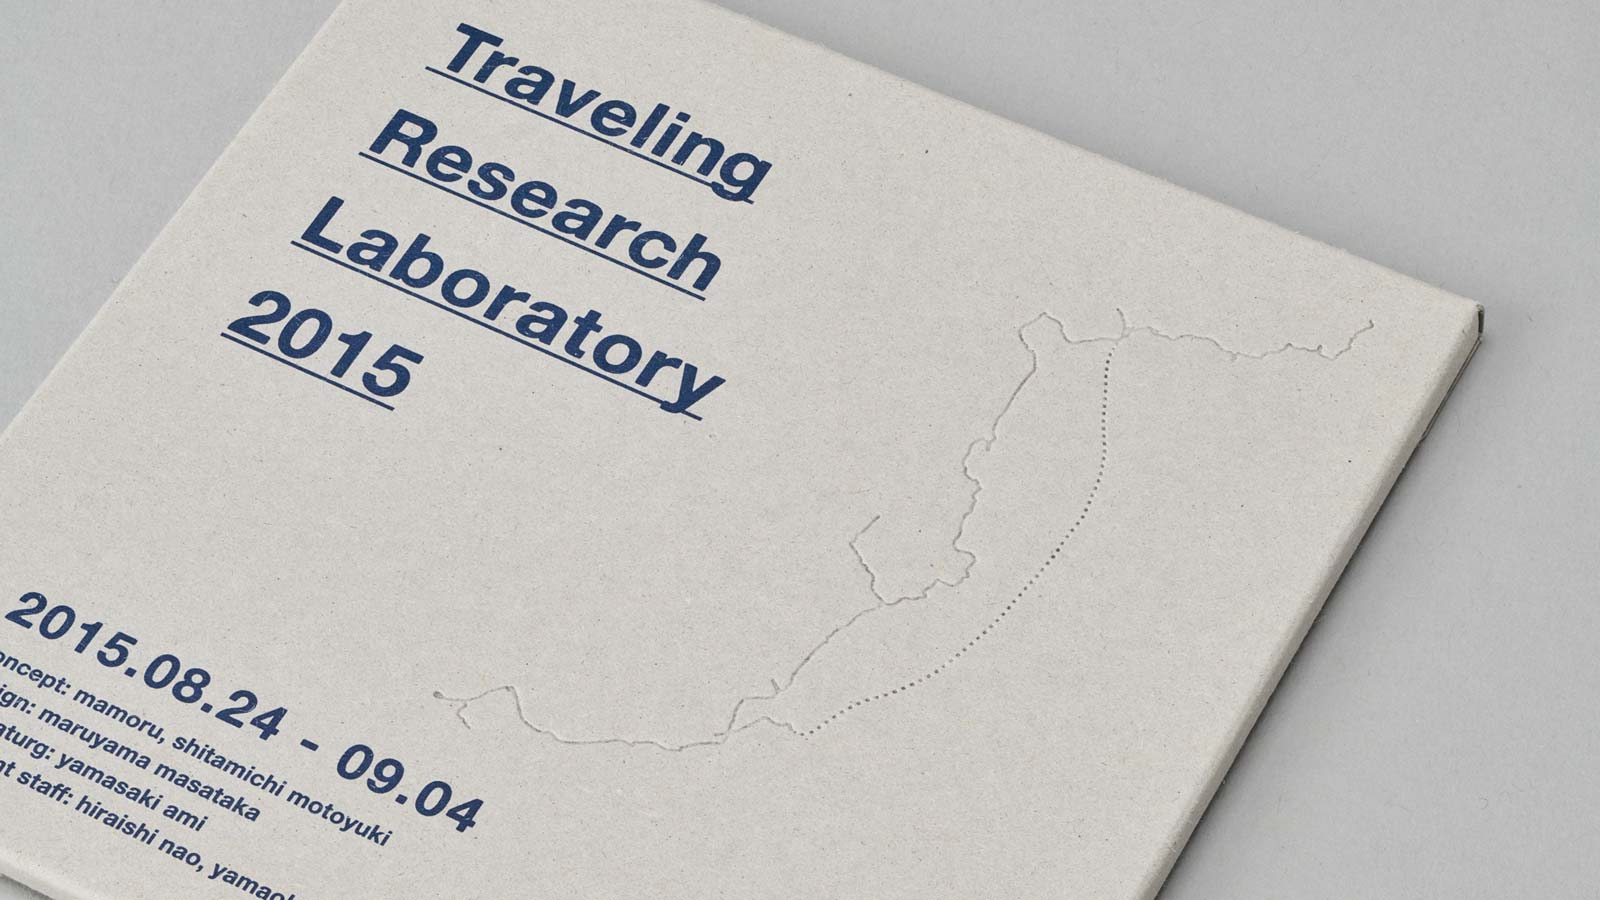 Traveling Research Labratory 2015